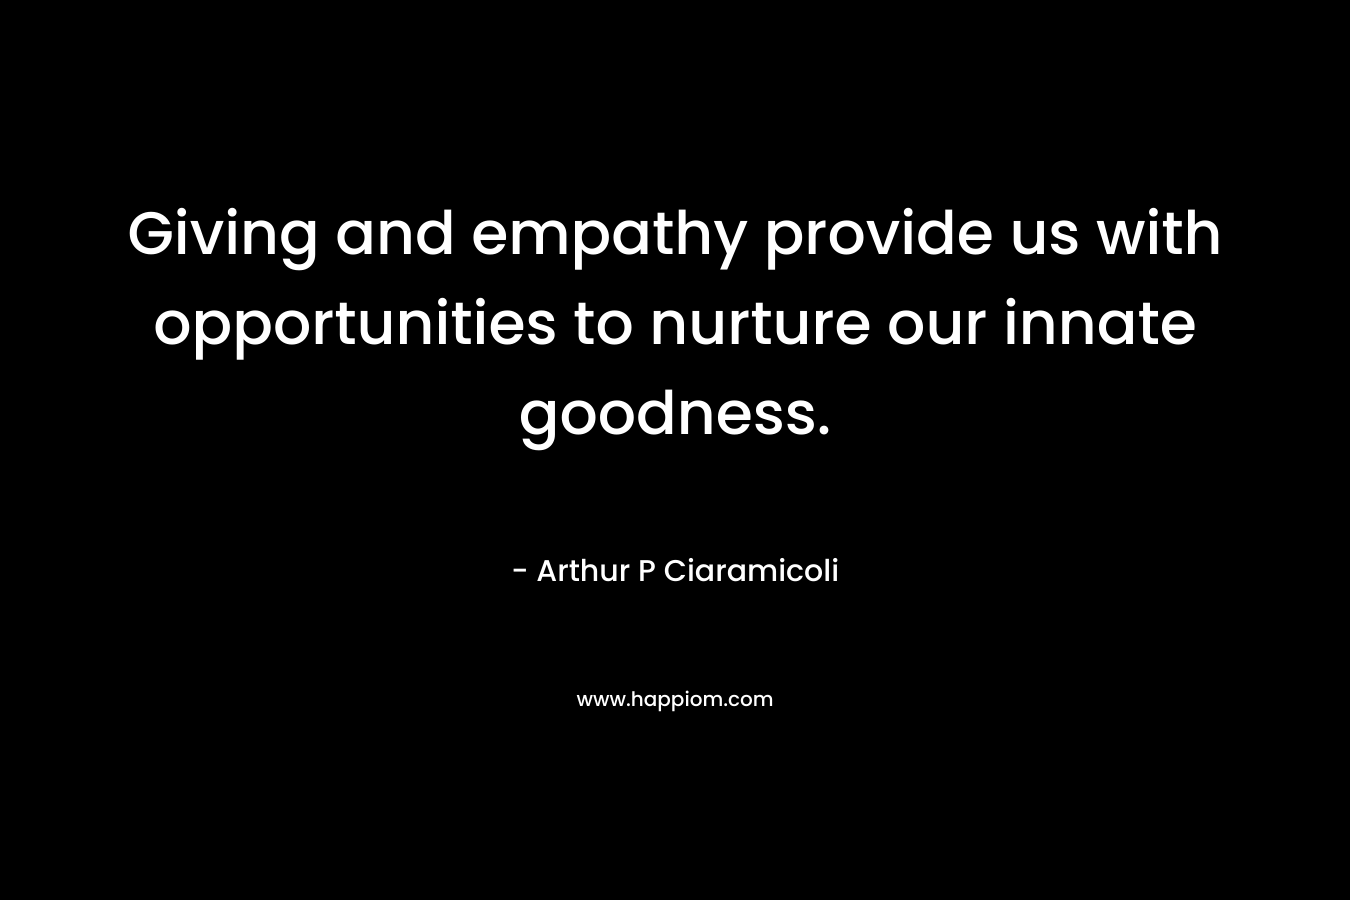 Giving and empathy provide us with opportunities to nurture our innate goodness.